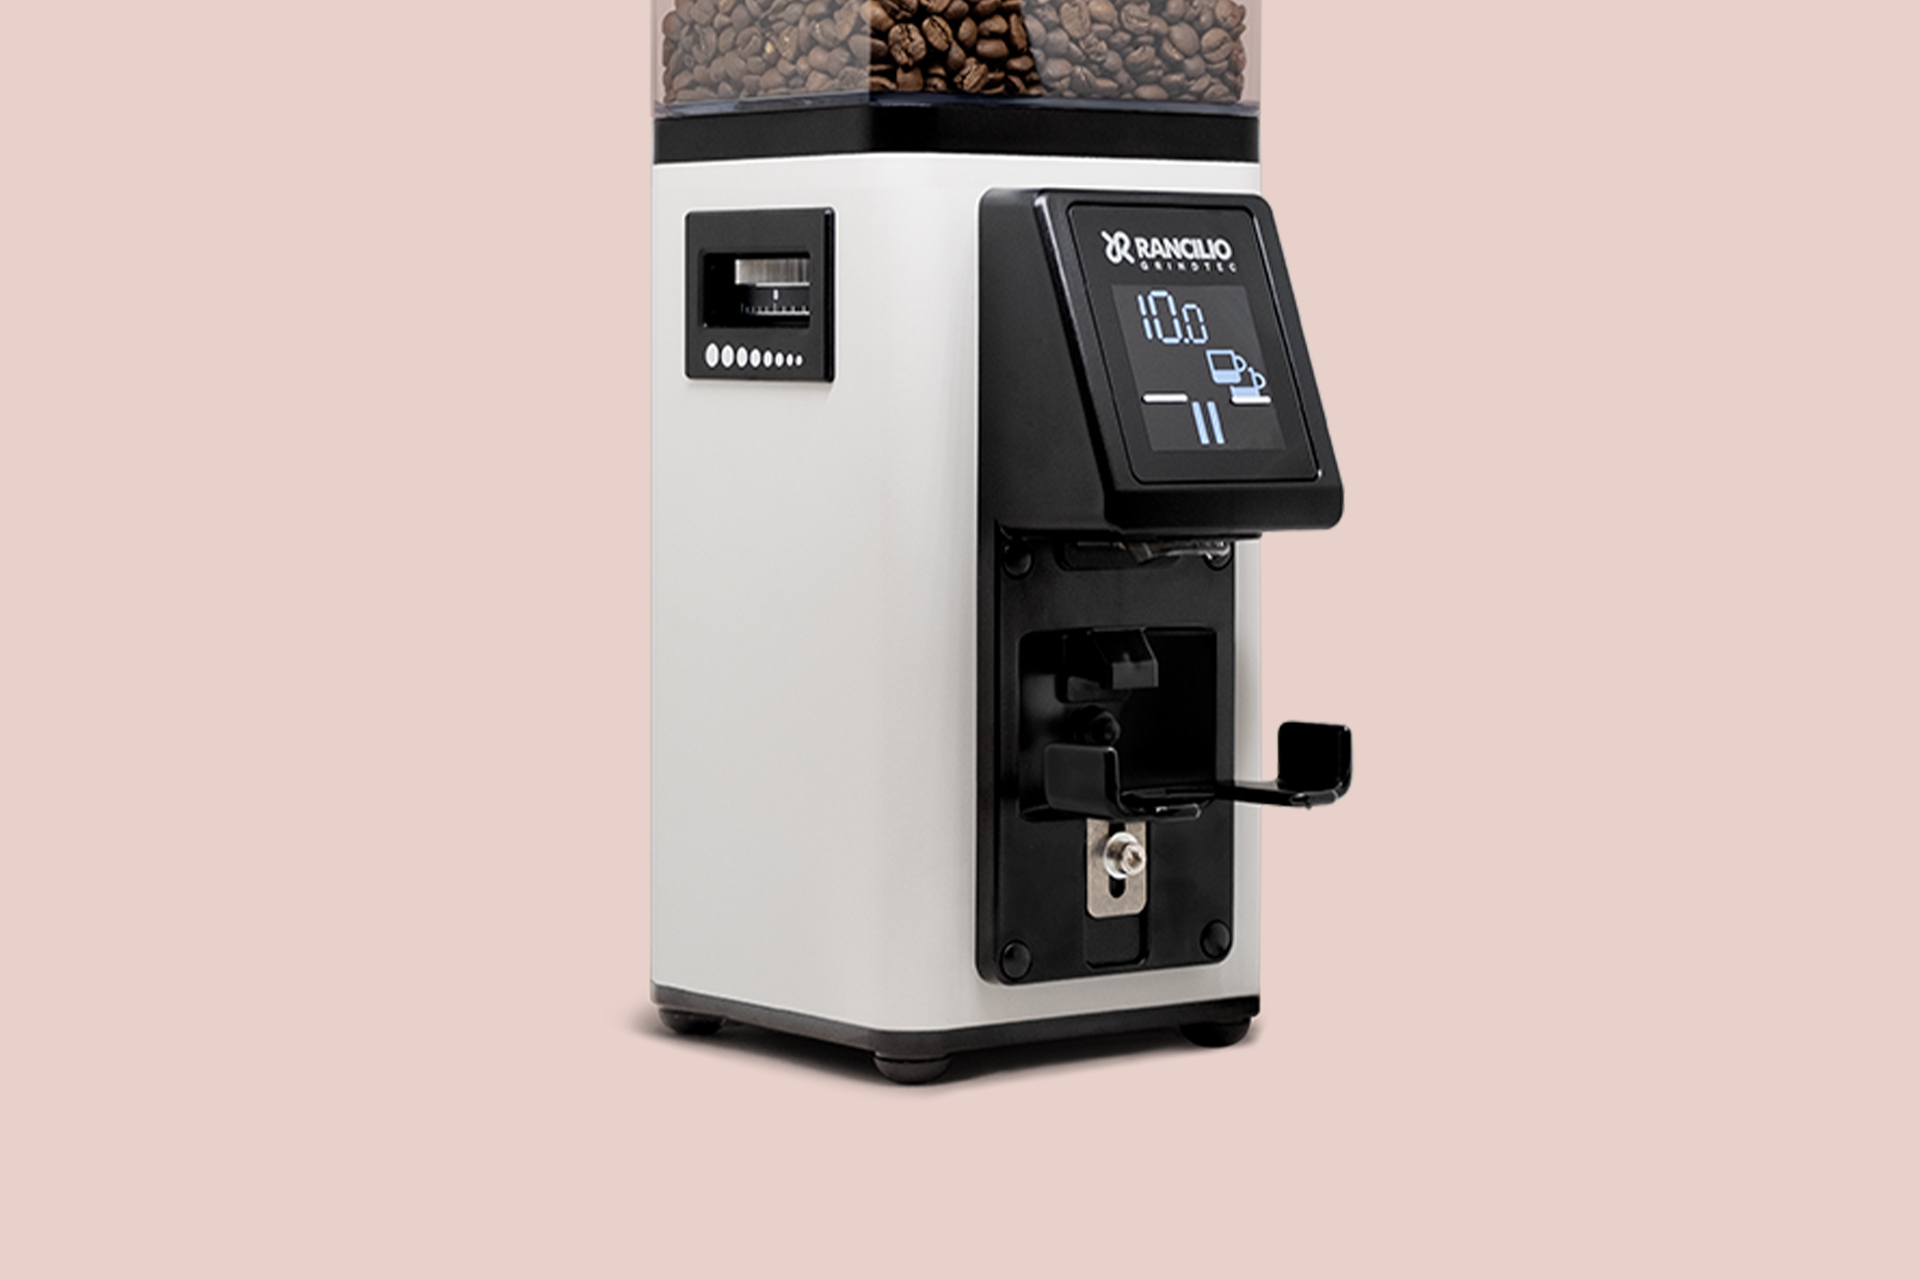 Stile : coffee grinder for home - Rancilio Group